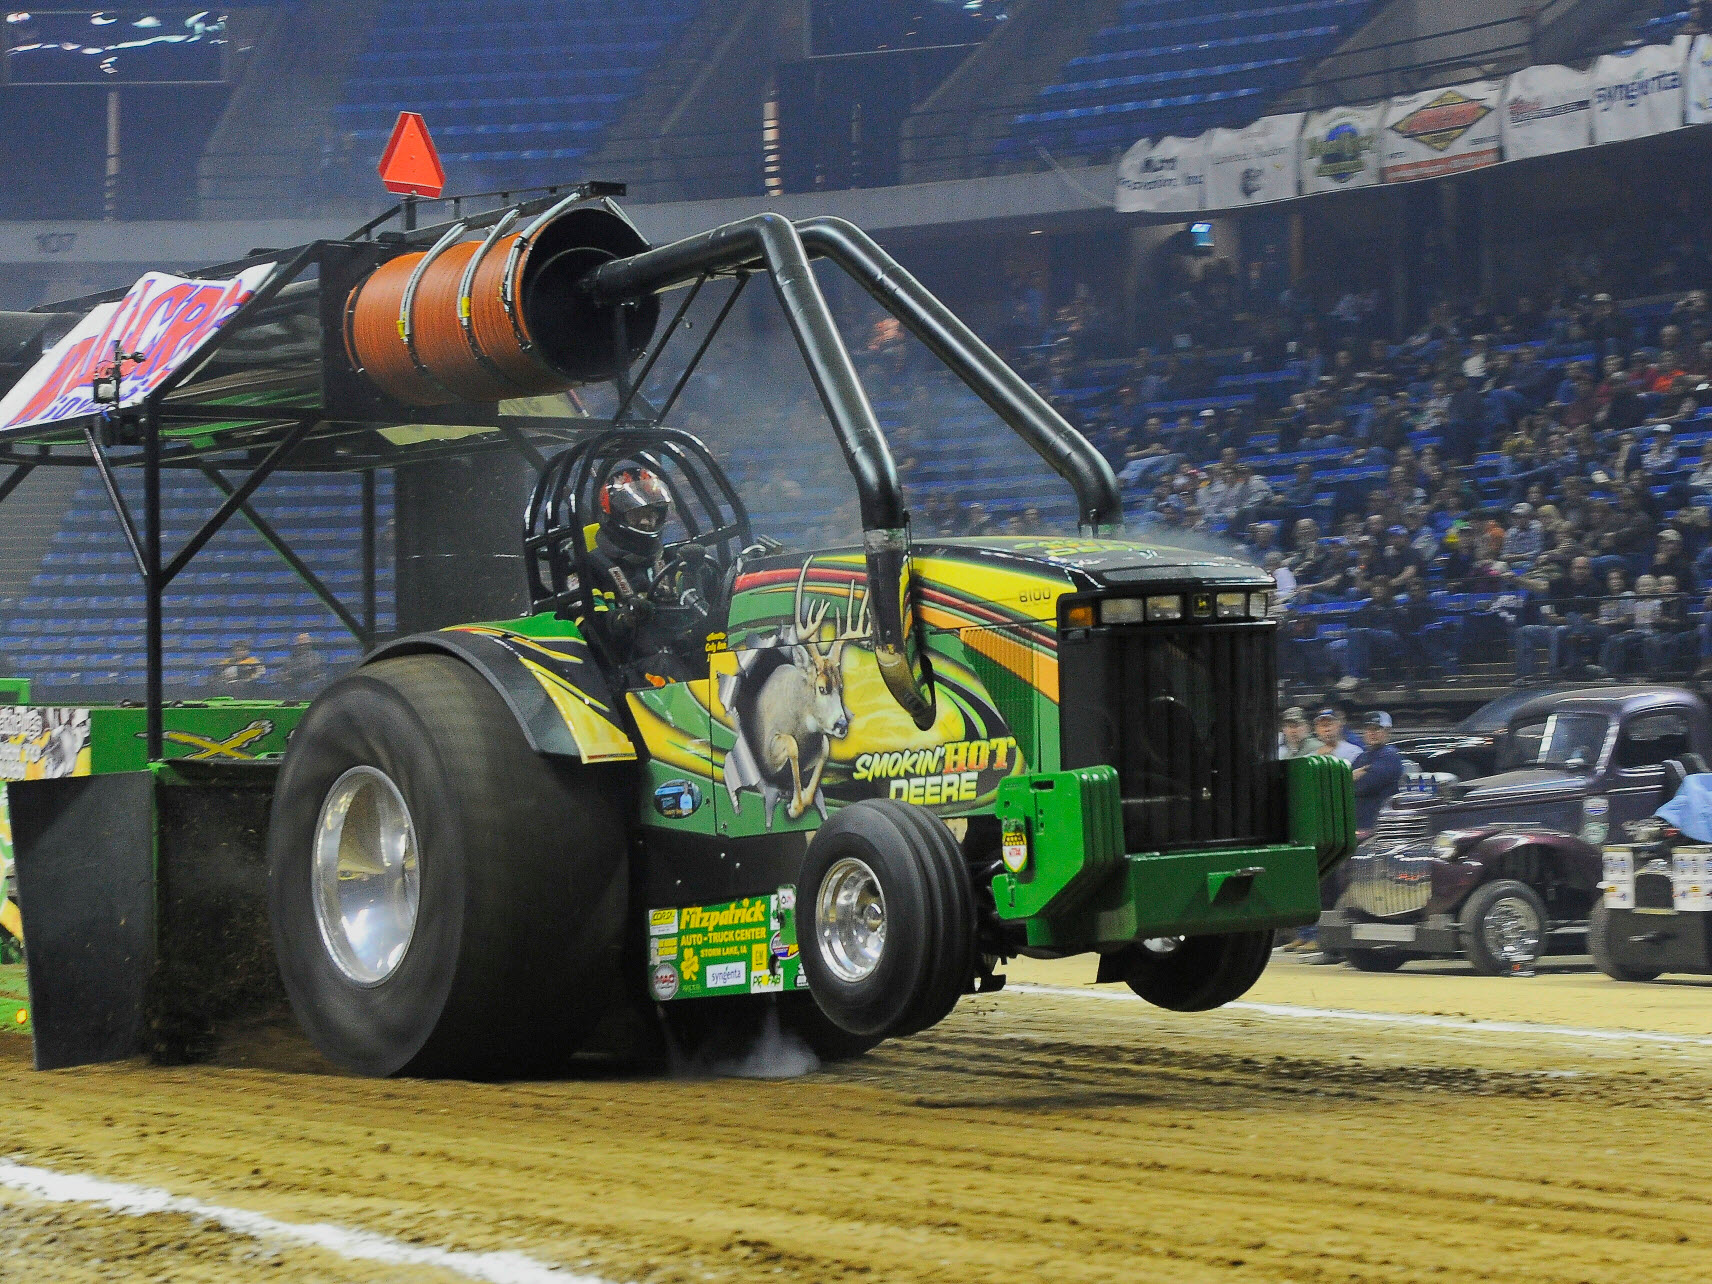 Championship Tractor Pull Roars Into the 2014 Western Farm Show in